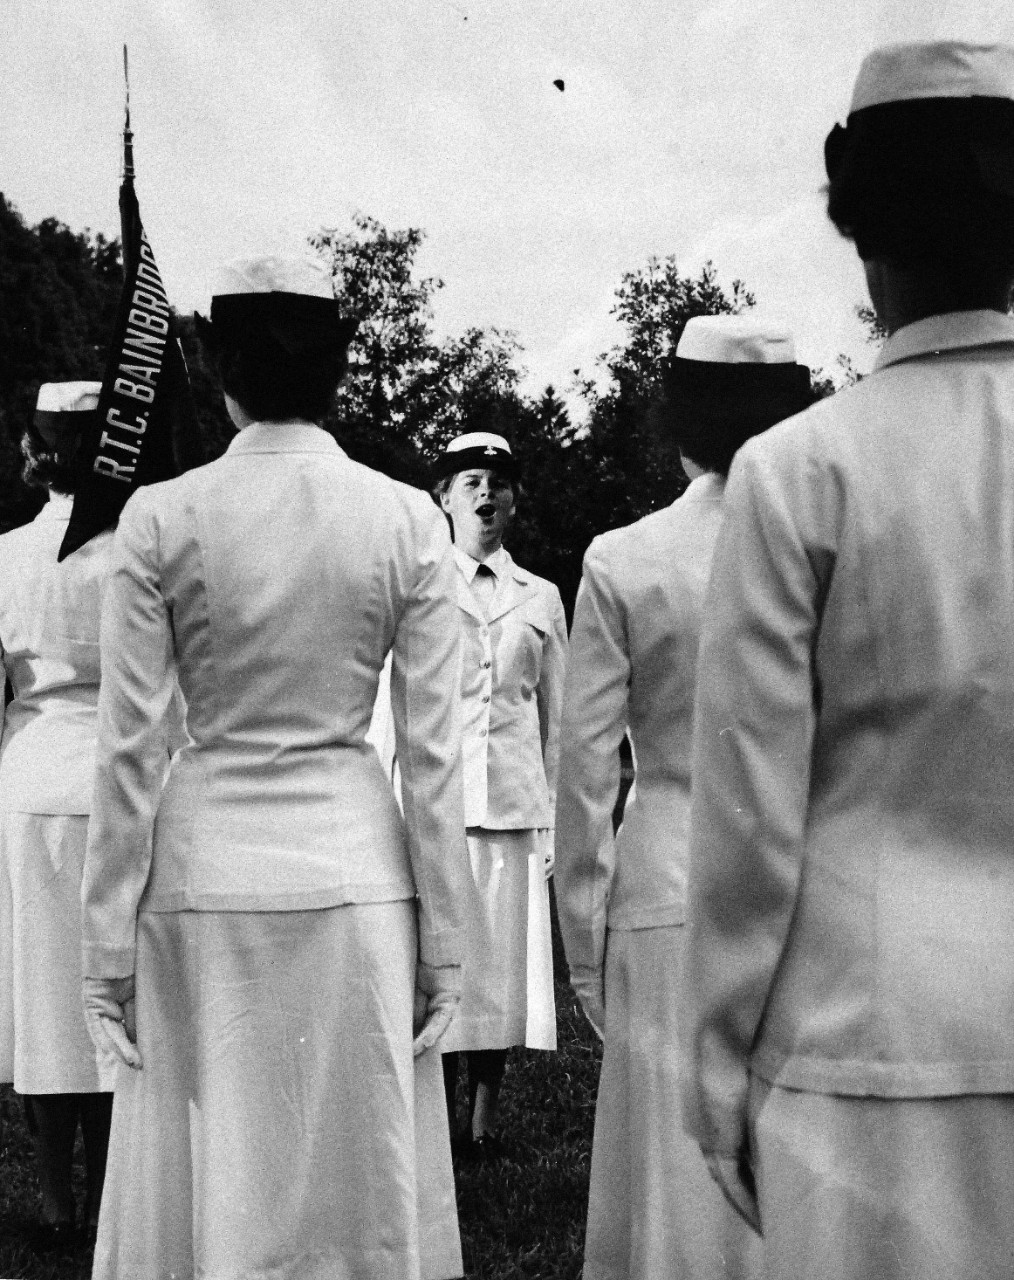 USN 709488:    Seaman Apprentice Barbara Boyd, July 1955.  Boyd is an example of the young women presently undergoing WAVE Recruit Training at the Naval Training Center, Bainbridge, Maryland.  She is shown announcing orders to the other recruits.   Master Caption:  WAVES Observe 13th Anniversary:   Preparatory to their Thirteenth Anniversary, July 30, WAVE Recruits at the Naval Training Center, Bainbridge, Maryland, pass in review.  These young women will take their places with sailors in important technical and clerical duty assignments both at home and abroad.  At that time, there were approximately 7,000 WAVES on active duty in the U.S. Navy.   Photograph released July 25, 1955.  Official U.S. Navy photograph, now in the collections of the National Archives.   